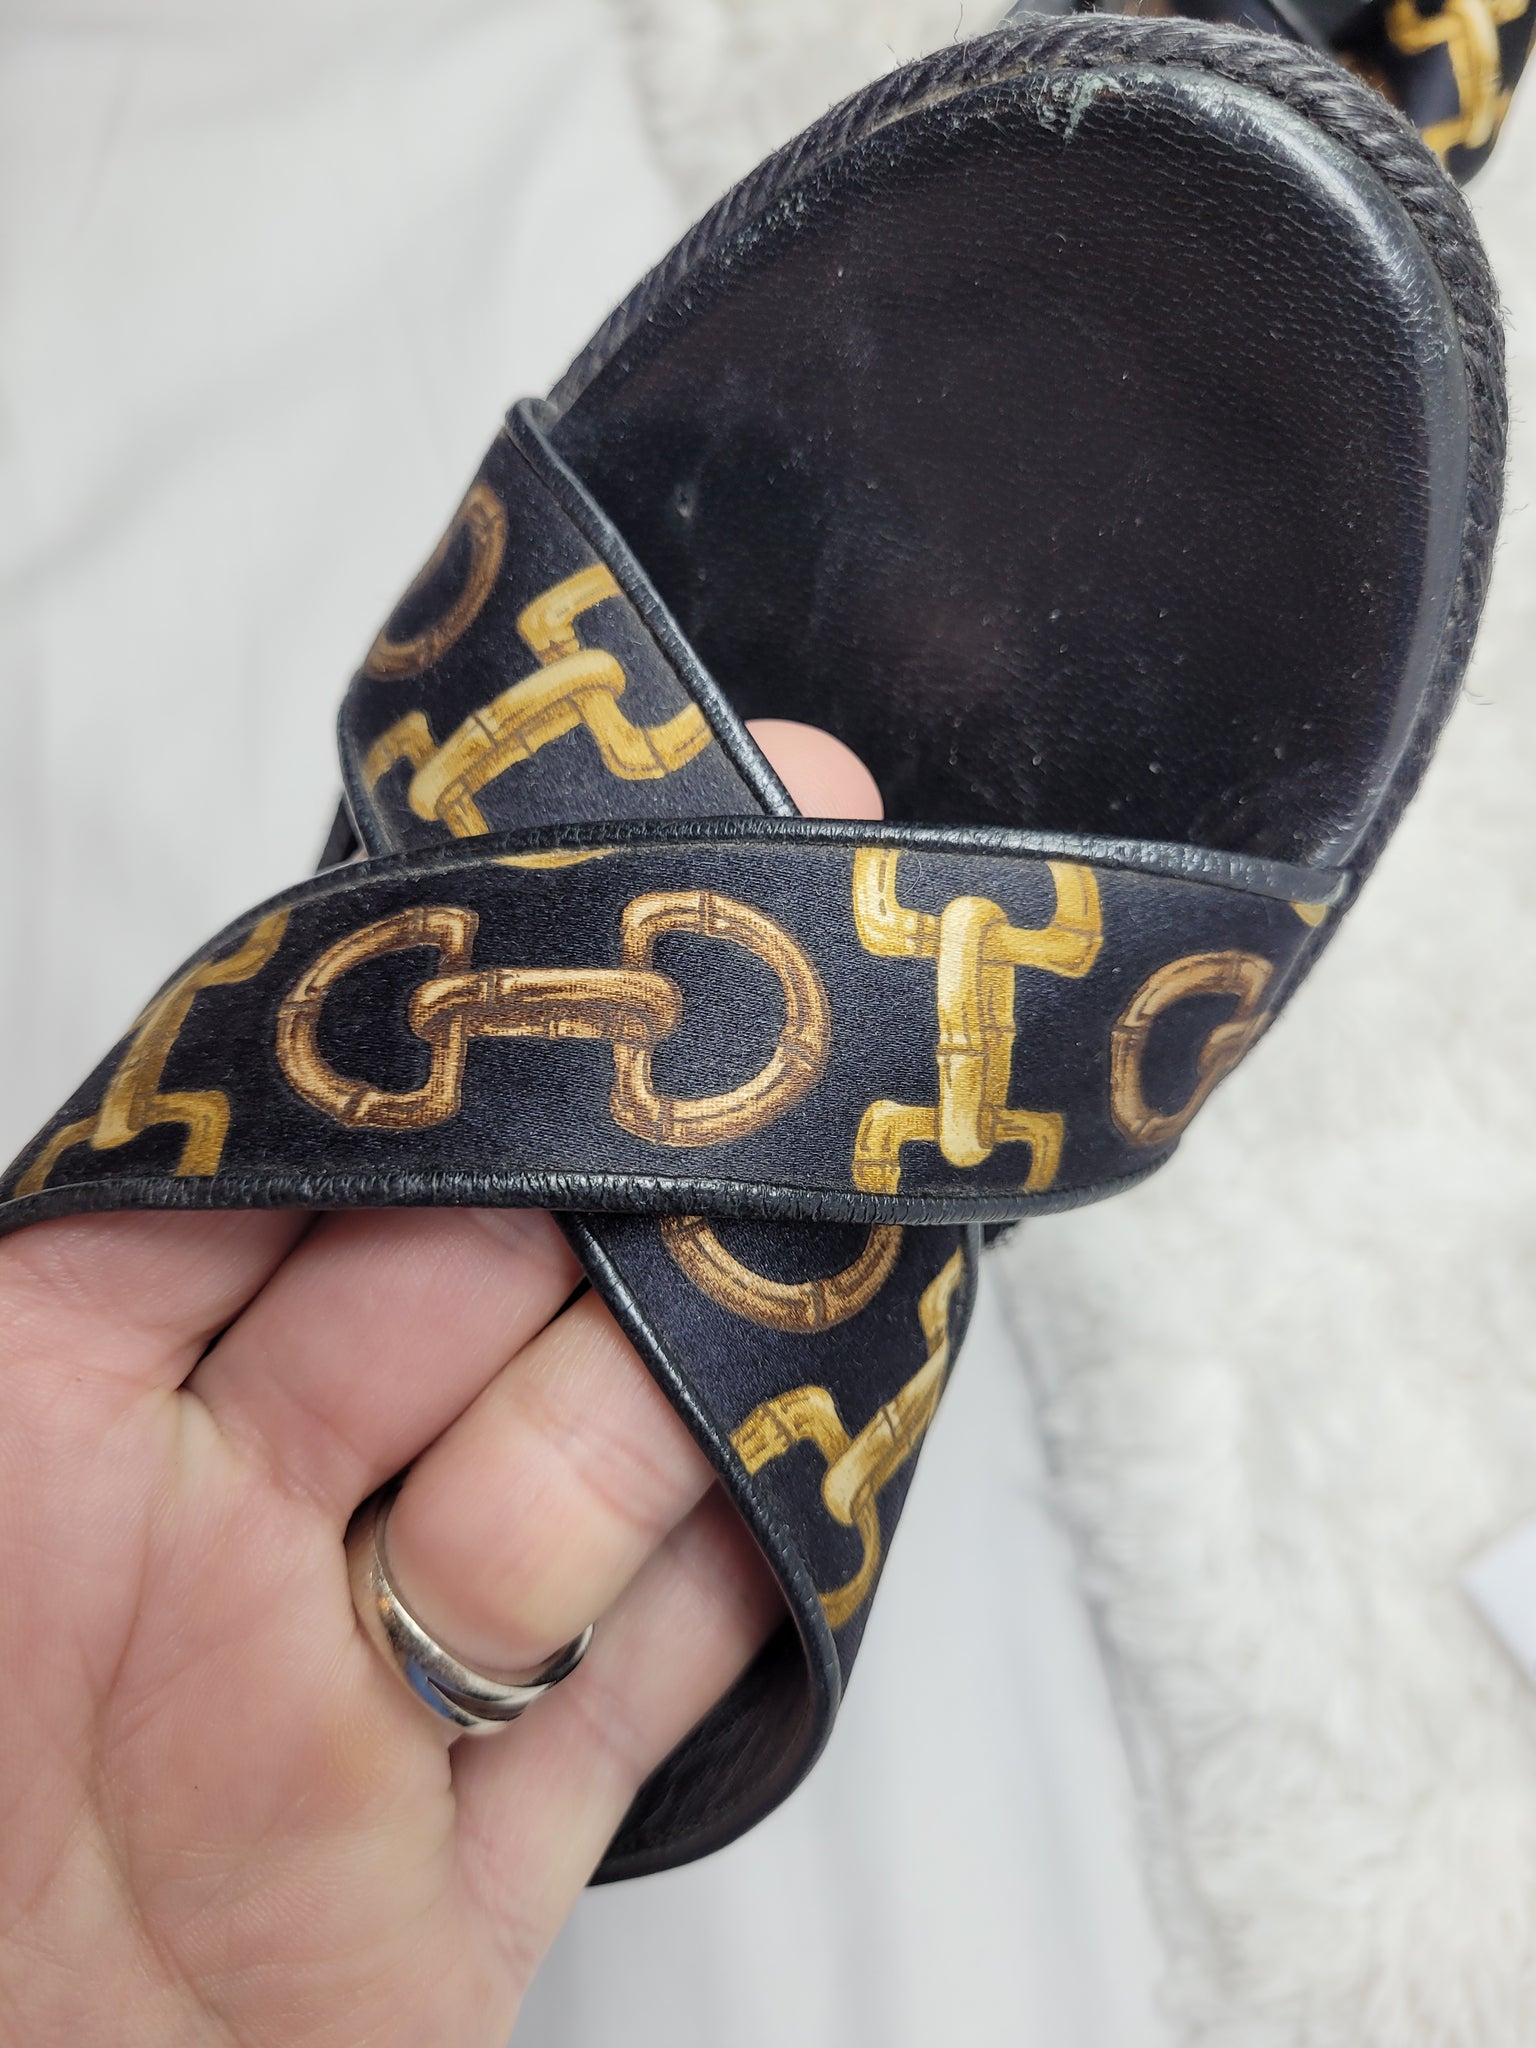 GUCCI PRE-OWNED AUTHENTIC WEDGE SANDALS, SIZE 6.5 – Shore Chic